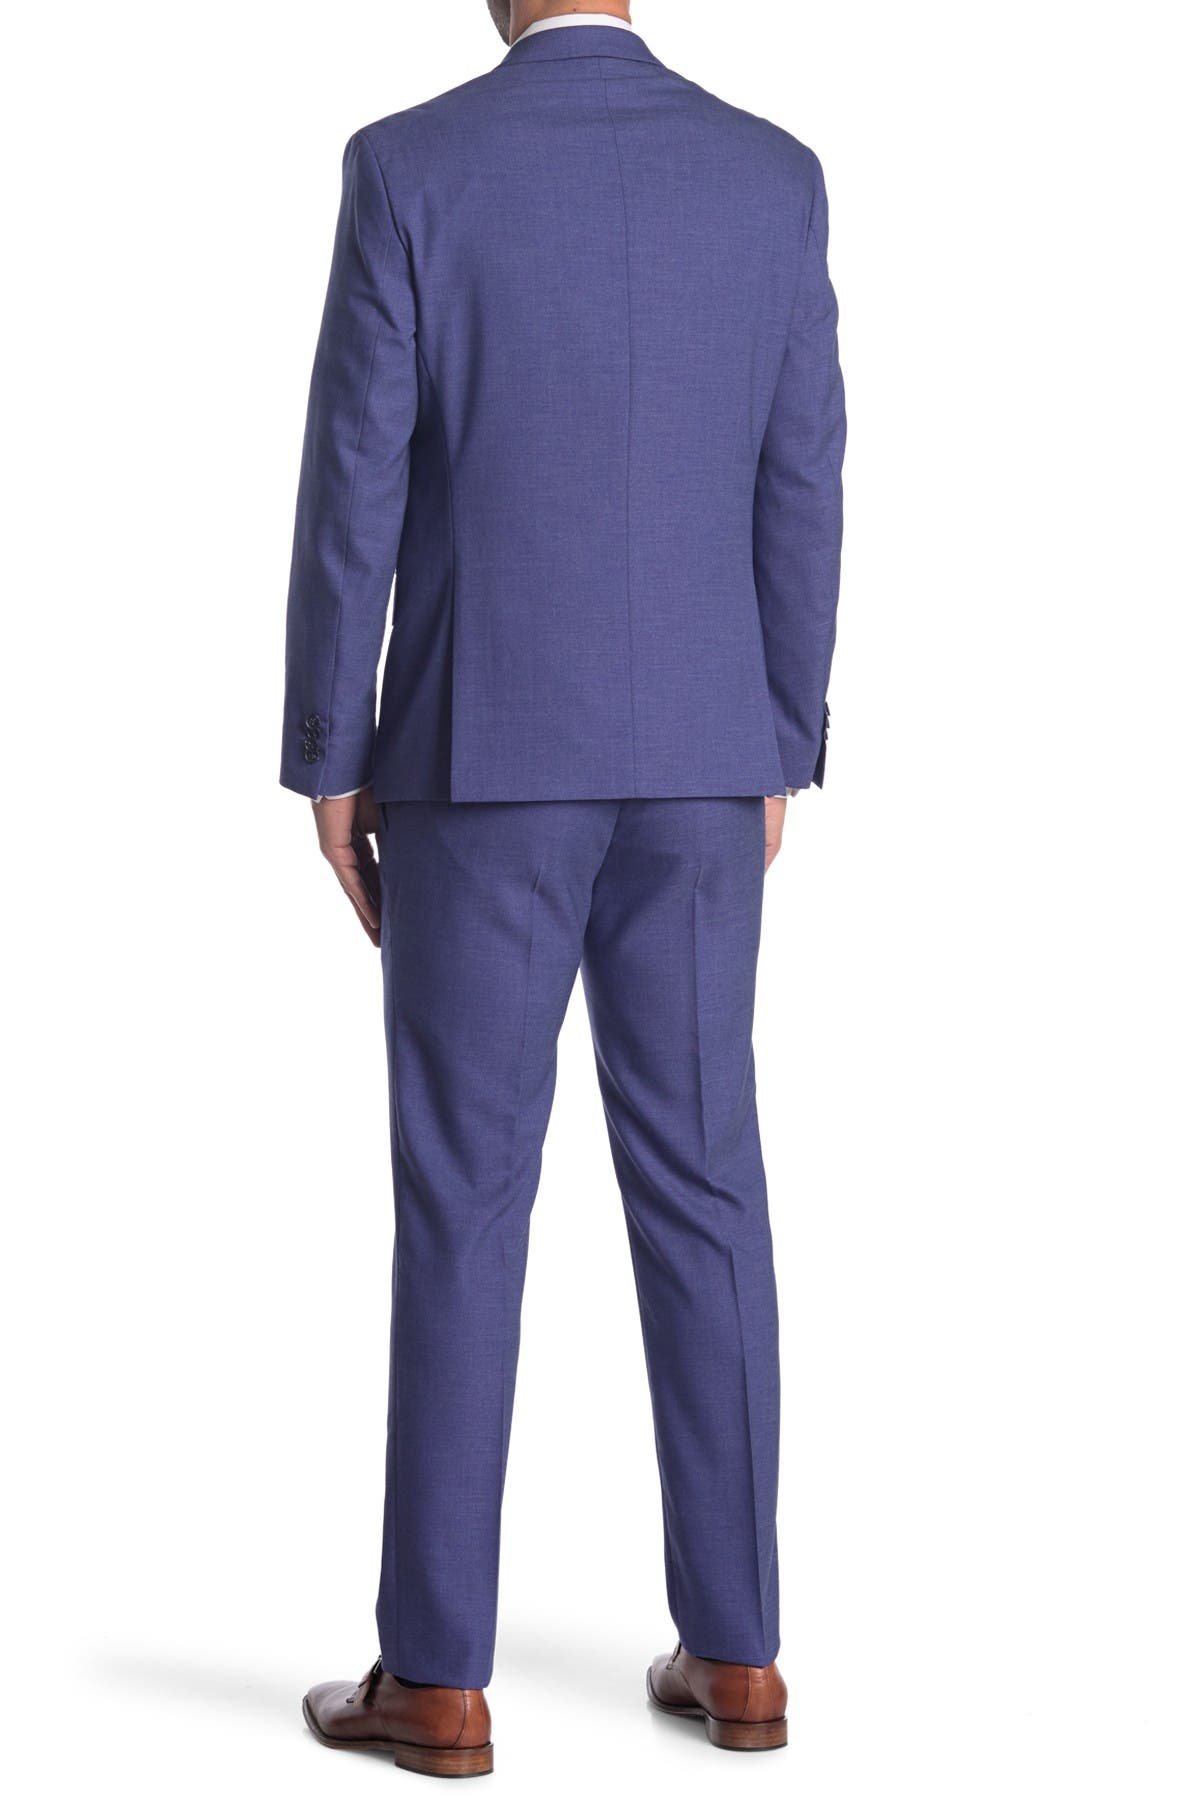 Kenneth Cole Reaction Grey Check Two Button Notch Lapel Slim Fit Suit In Bright Blue